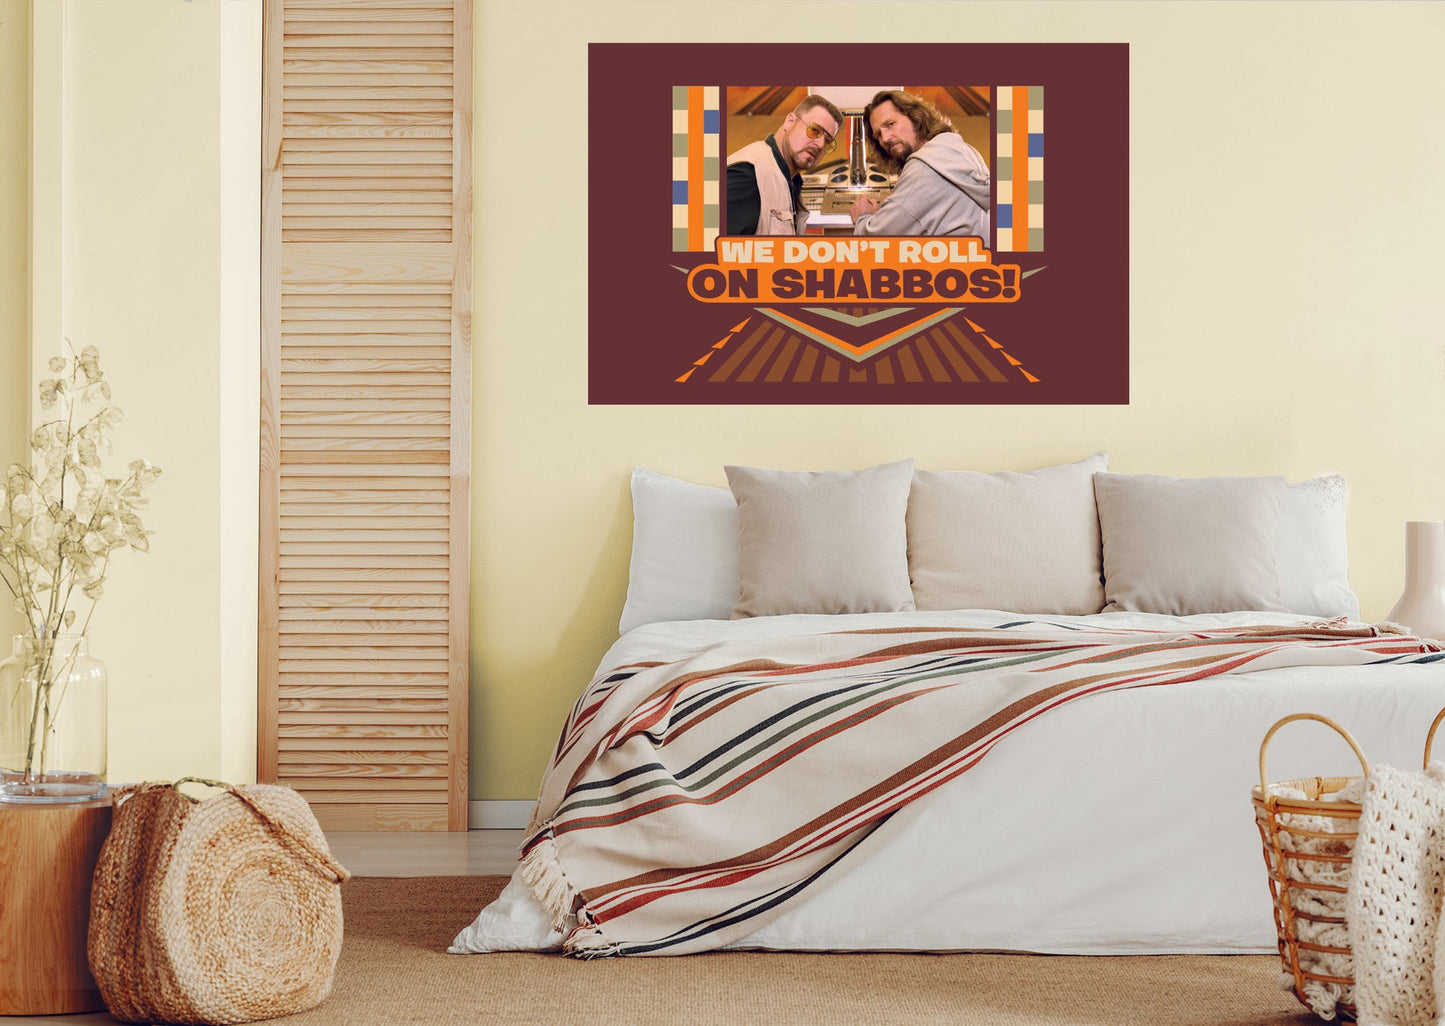 The Big Lebowski: Dont Roll on Shabbos Mural - Officially Licensed NBC Universal Removable Adhesive Decal